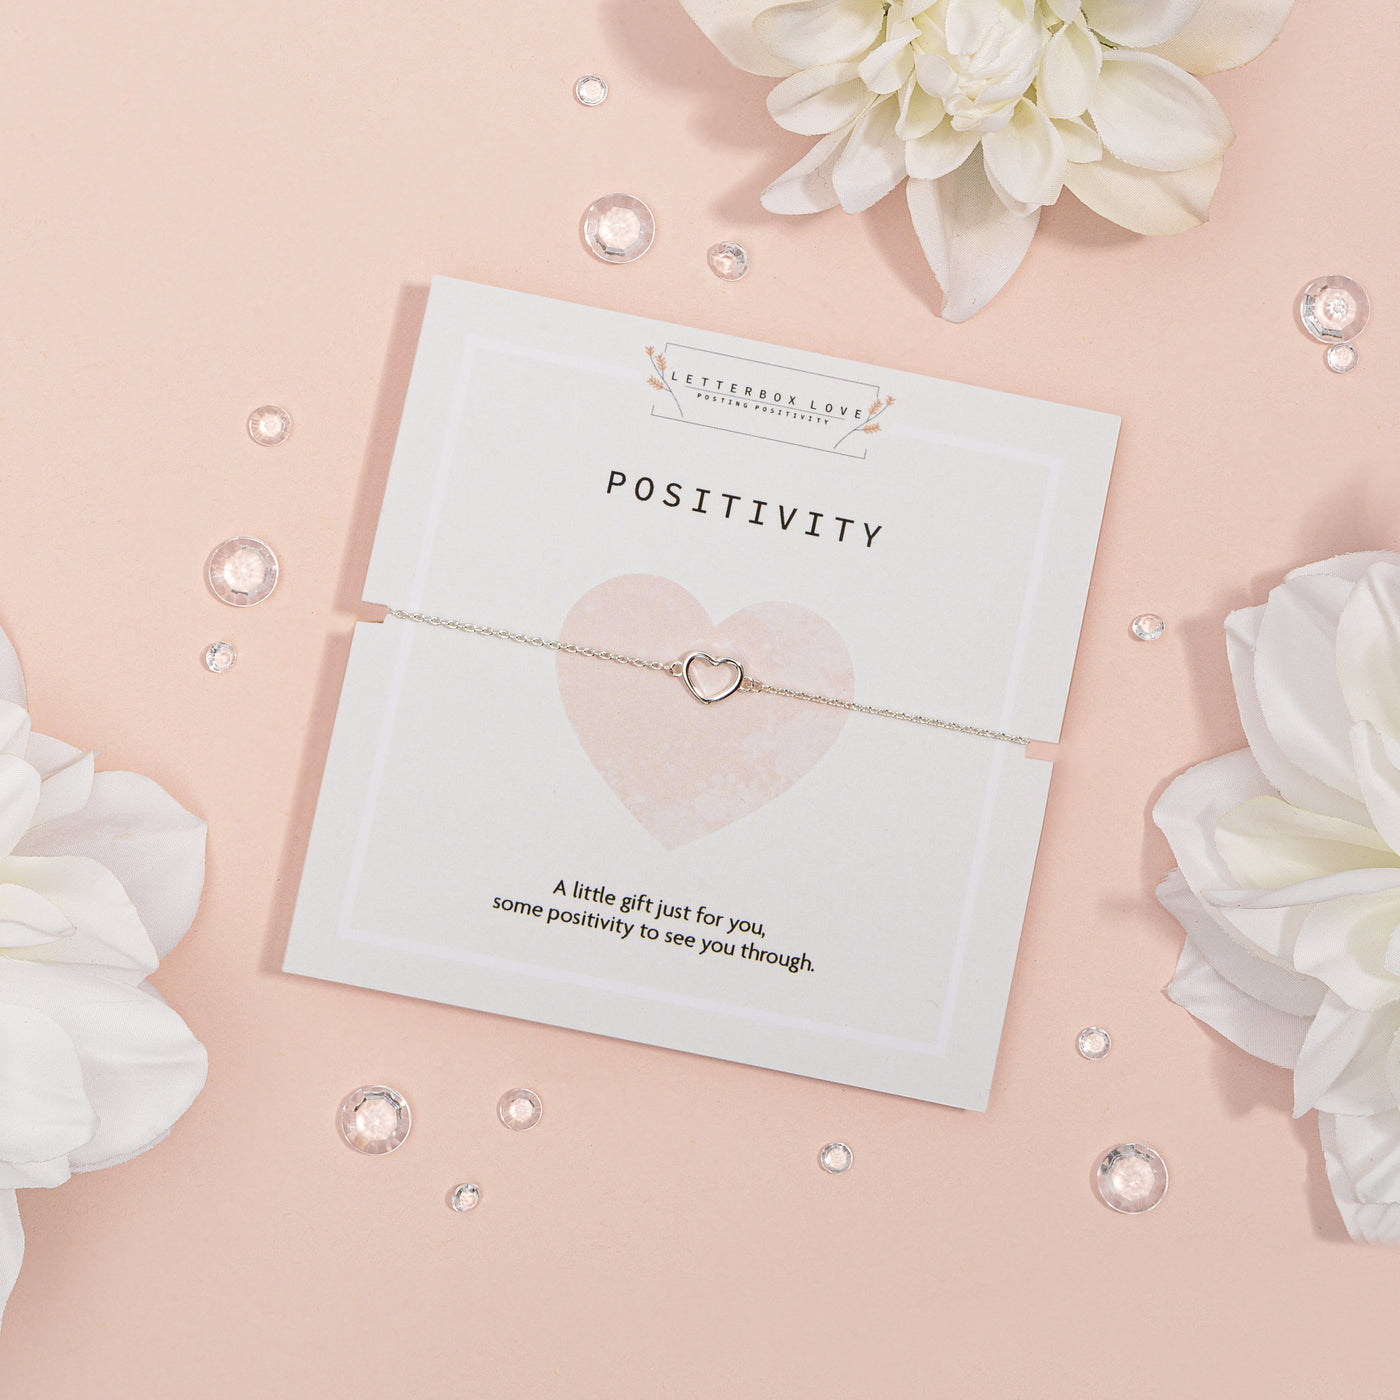 Elegant silver heart-shaped necklace on a 'POSITIVITY' card with the message 'A little gift just for you, some positivity to see you through.